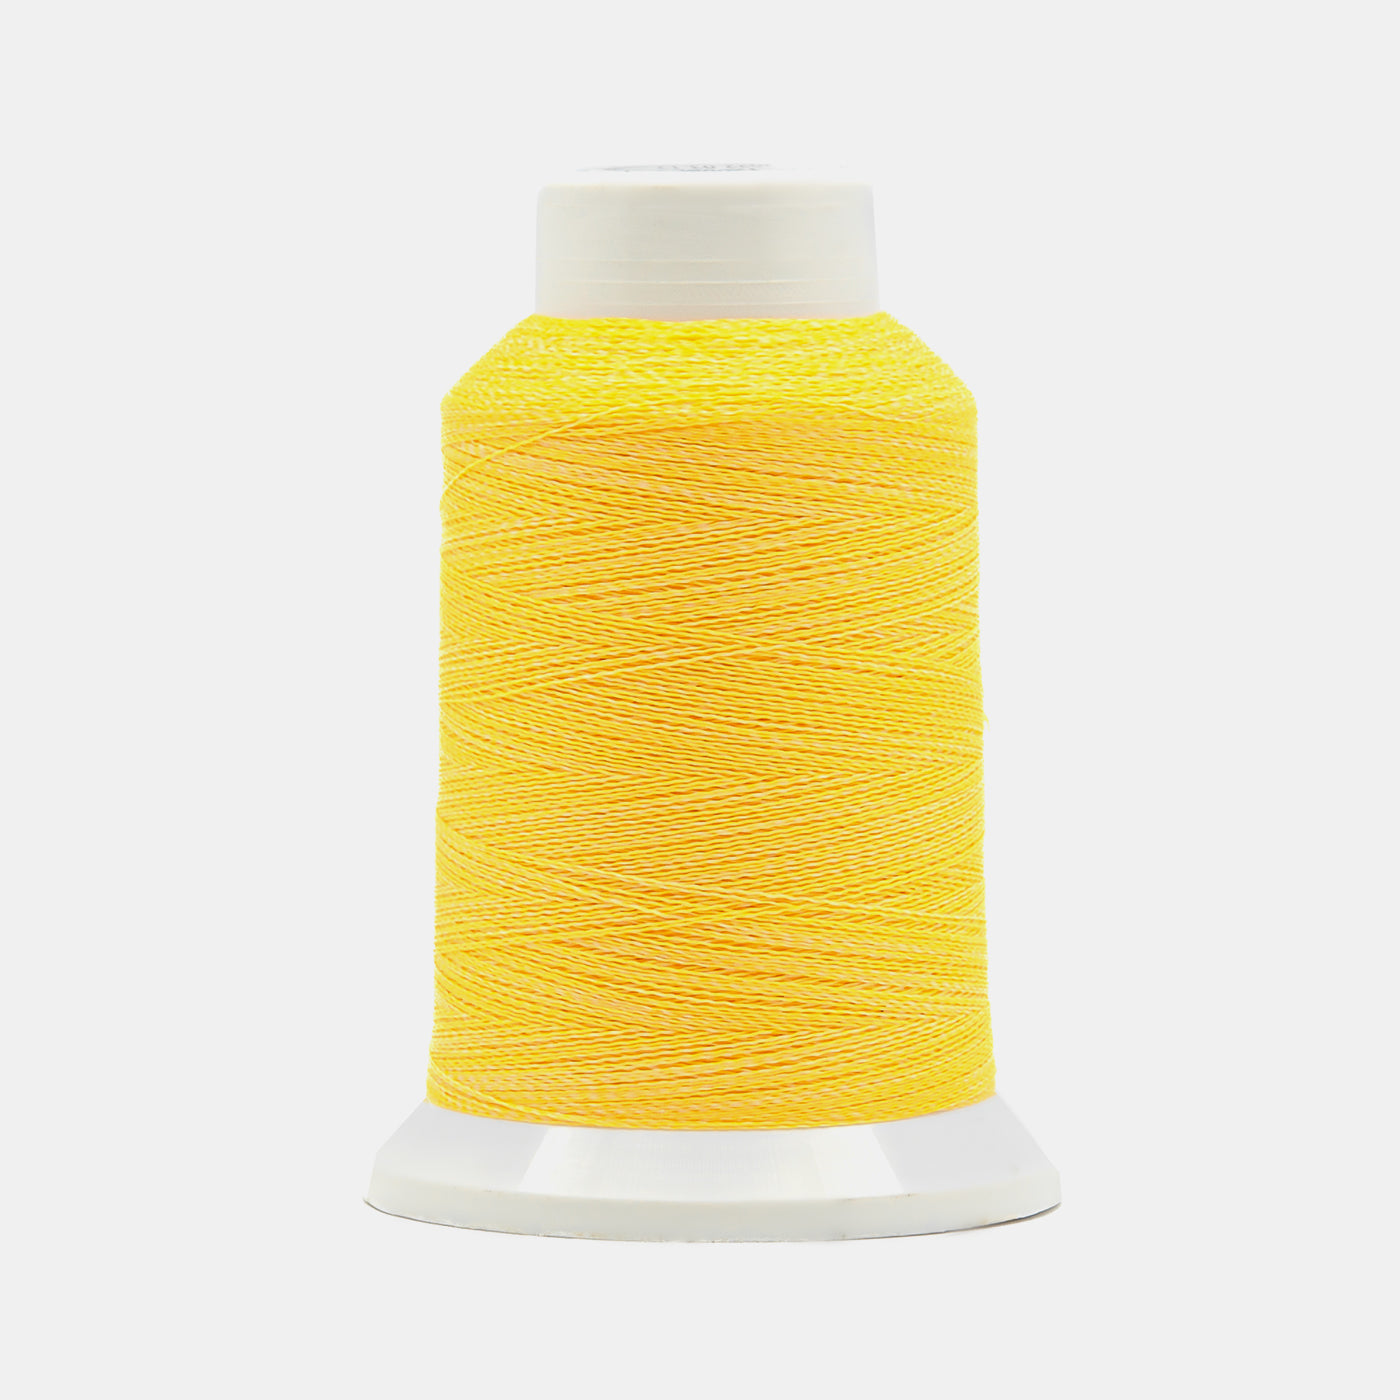 high light glow in the dark fluorescent embroidery thread (1200m)